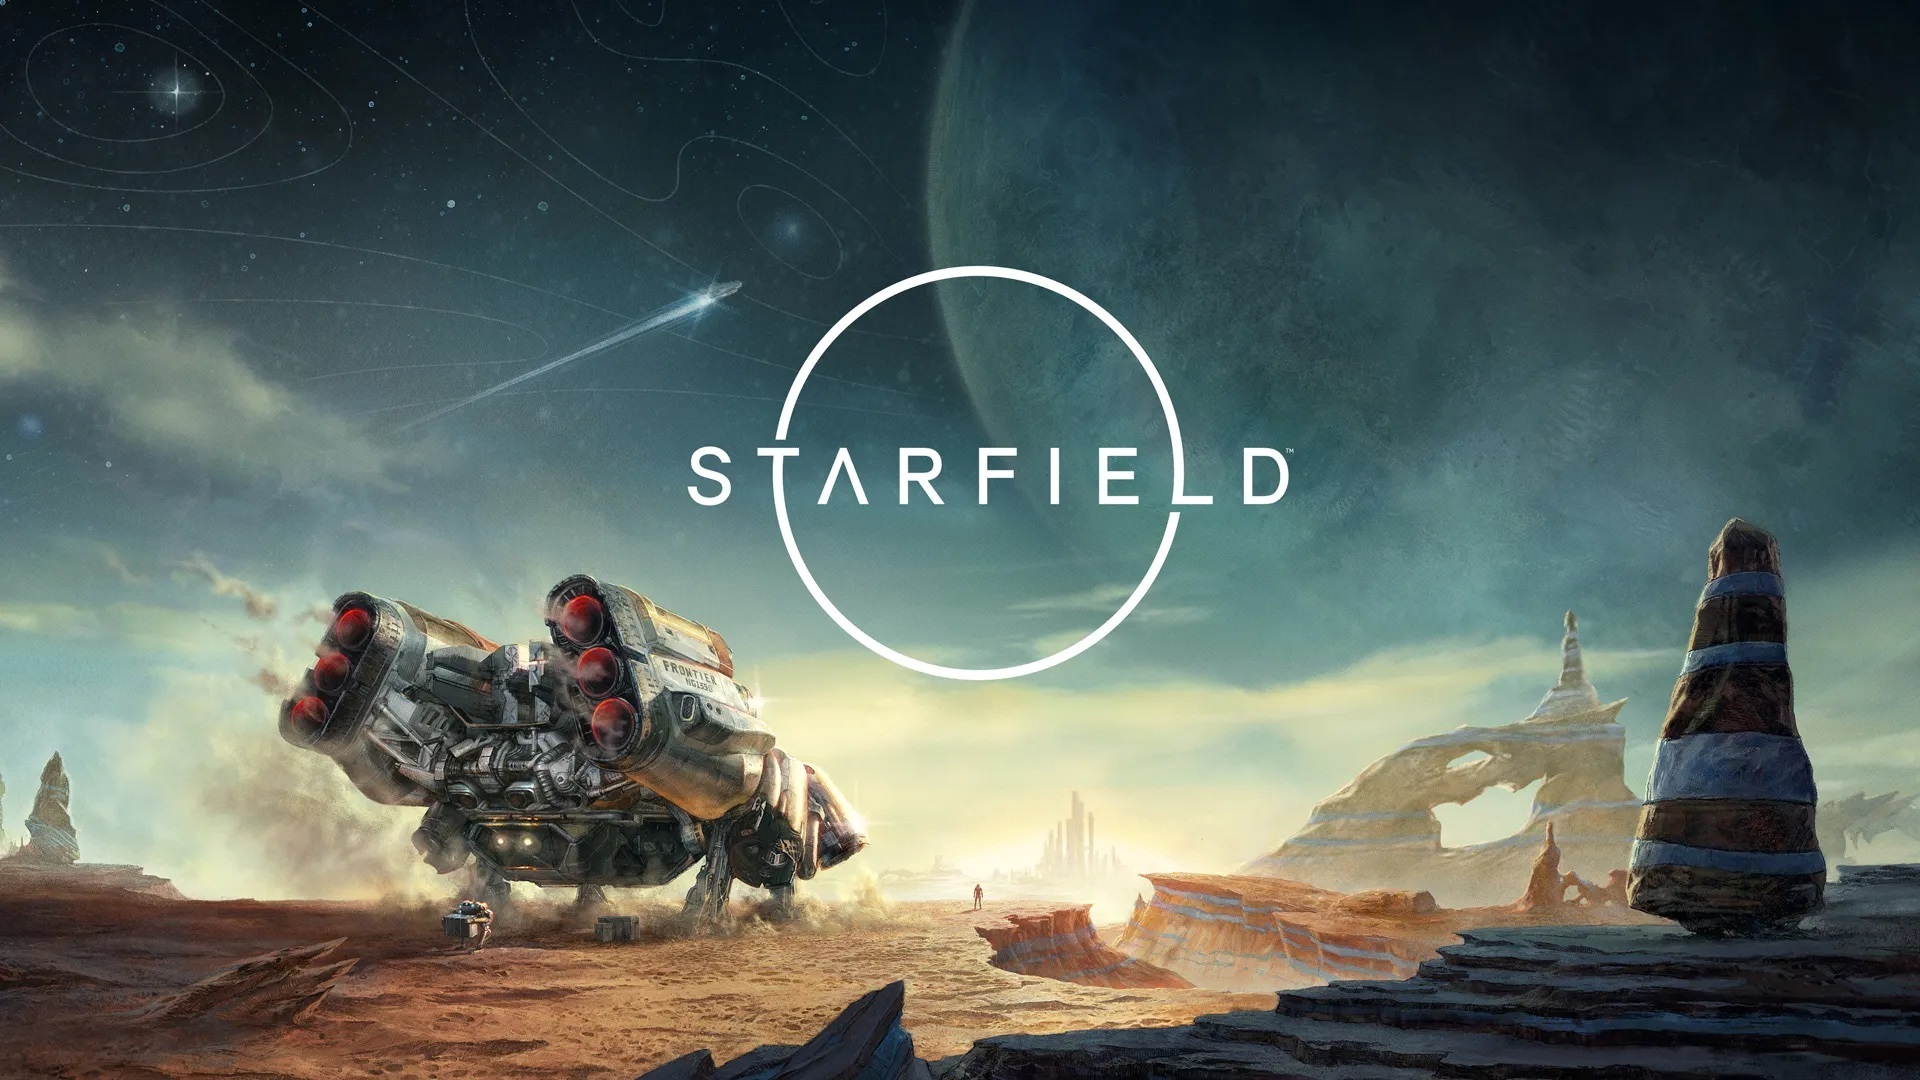 Starfield will be ready to take off in September this year